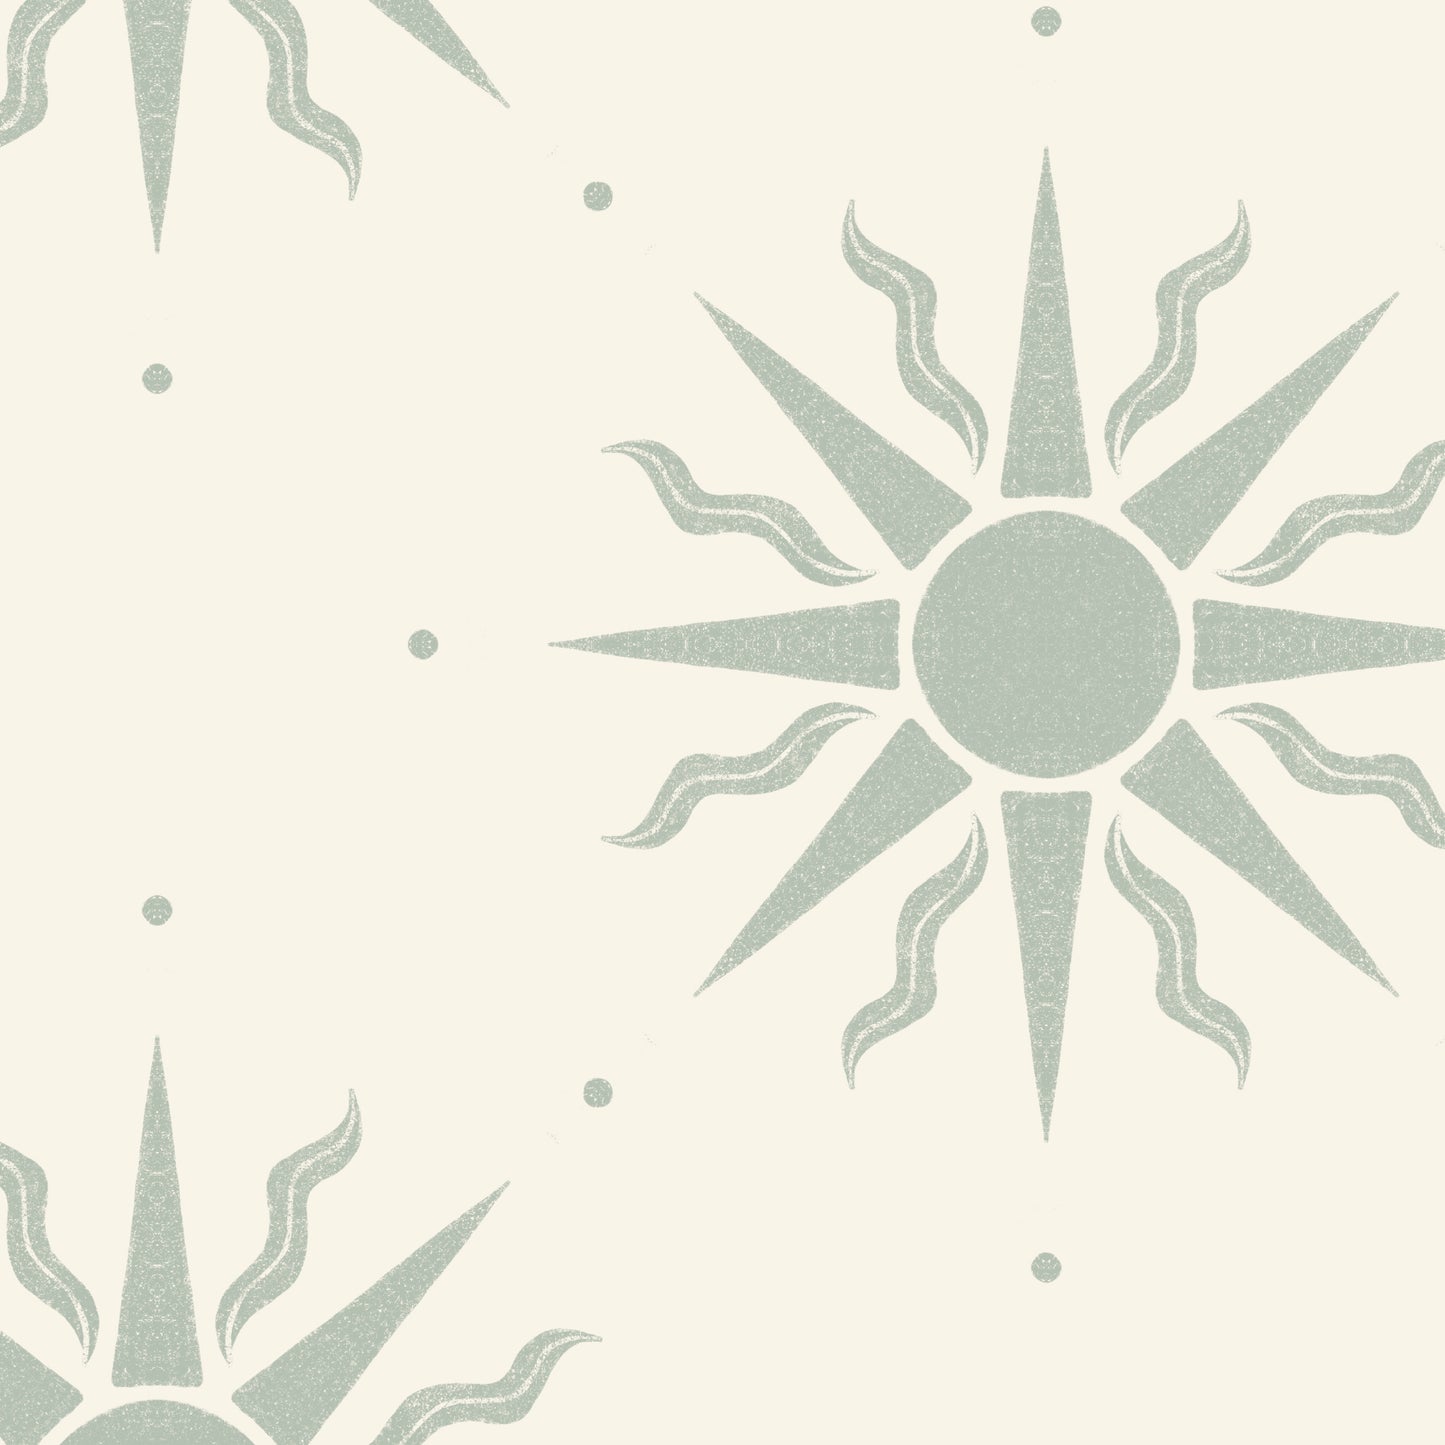 Sunny Suns Wallpaper in Sea Green shown in a close up view.